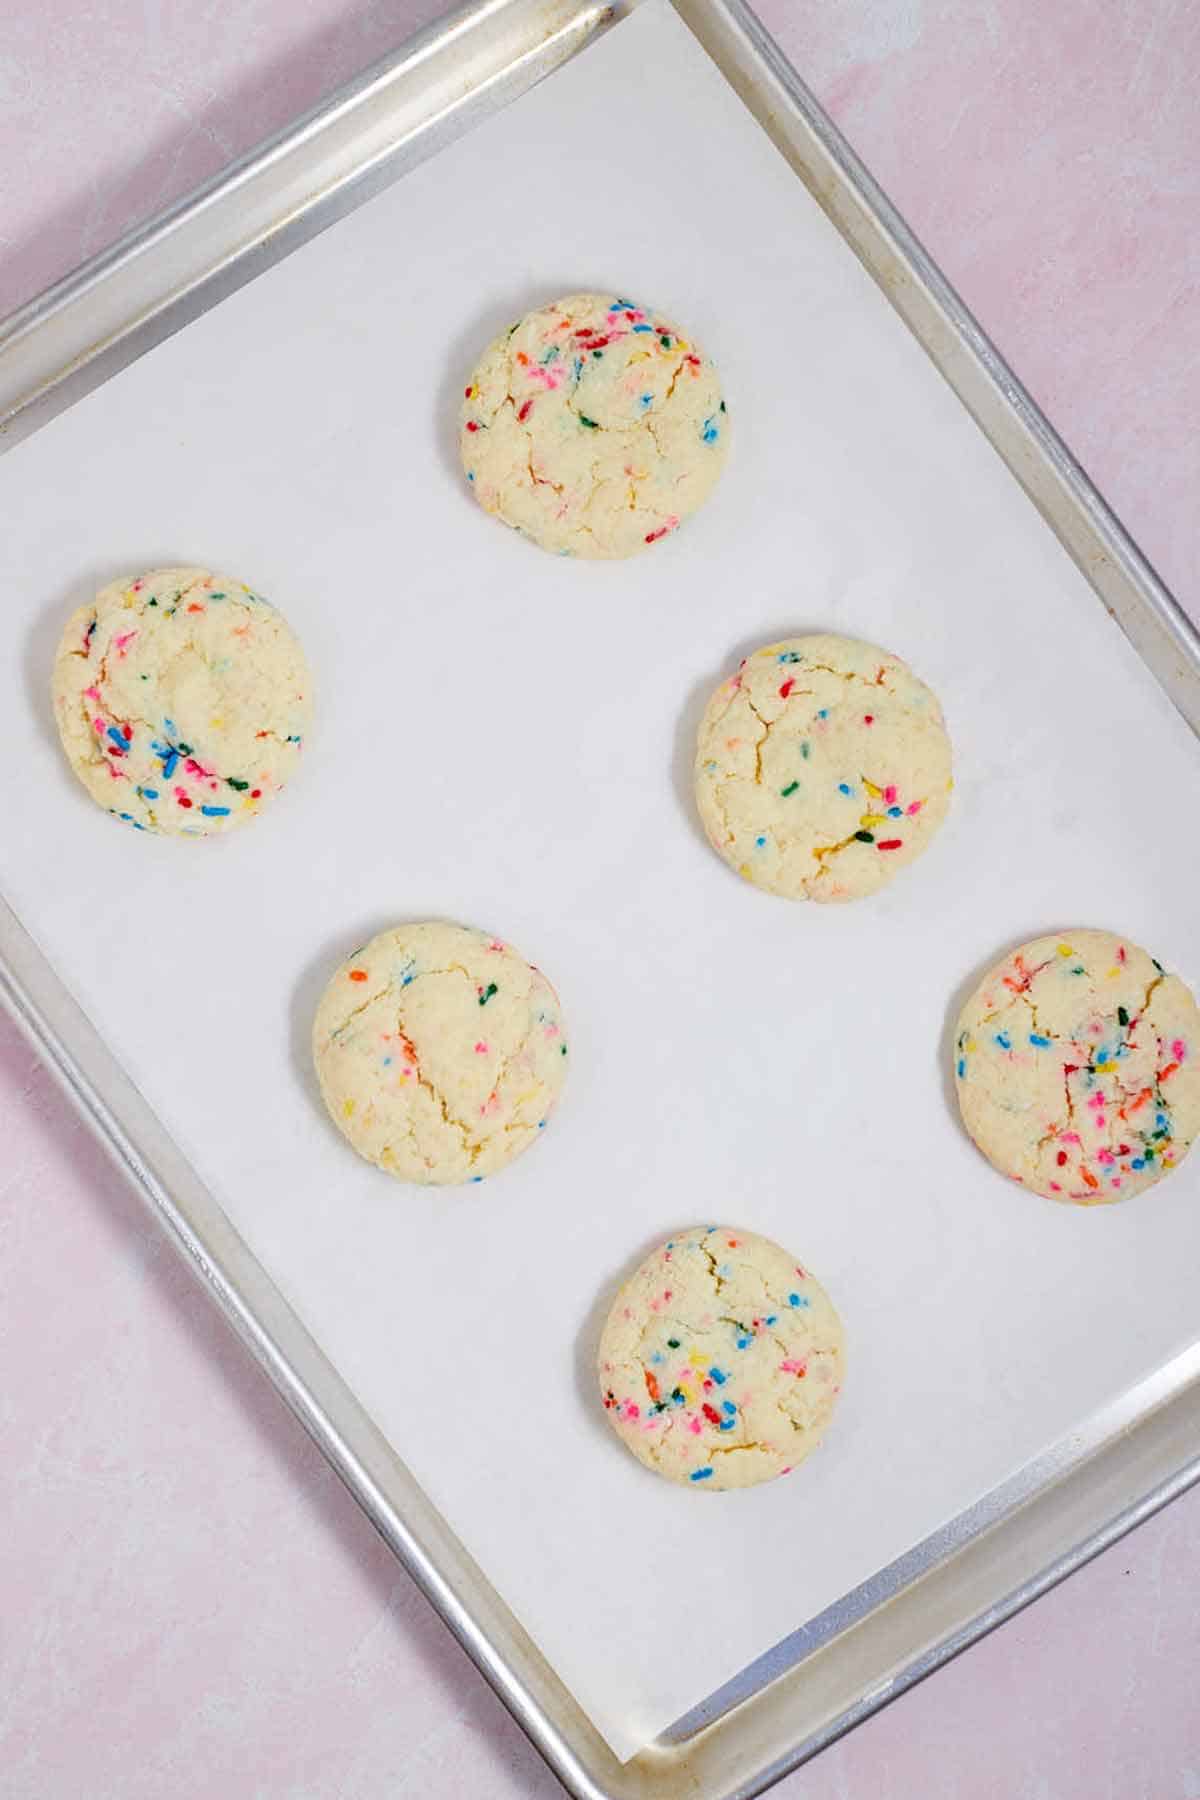 Baked Funfetti cookies on a cookie sheet.